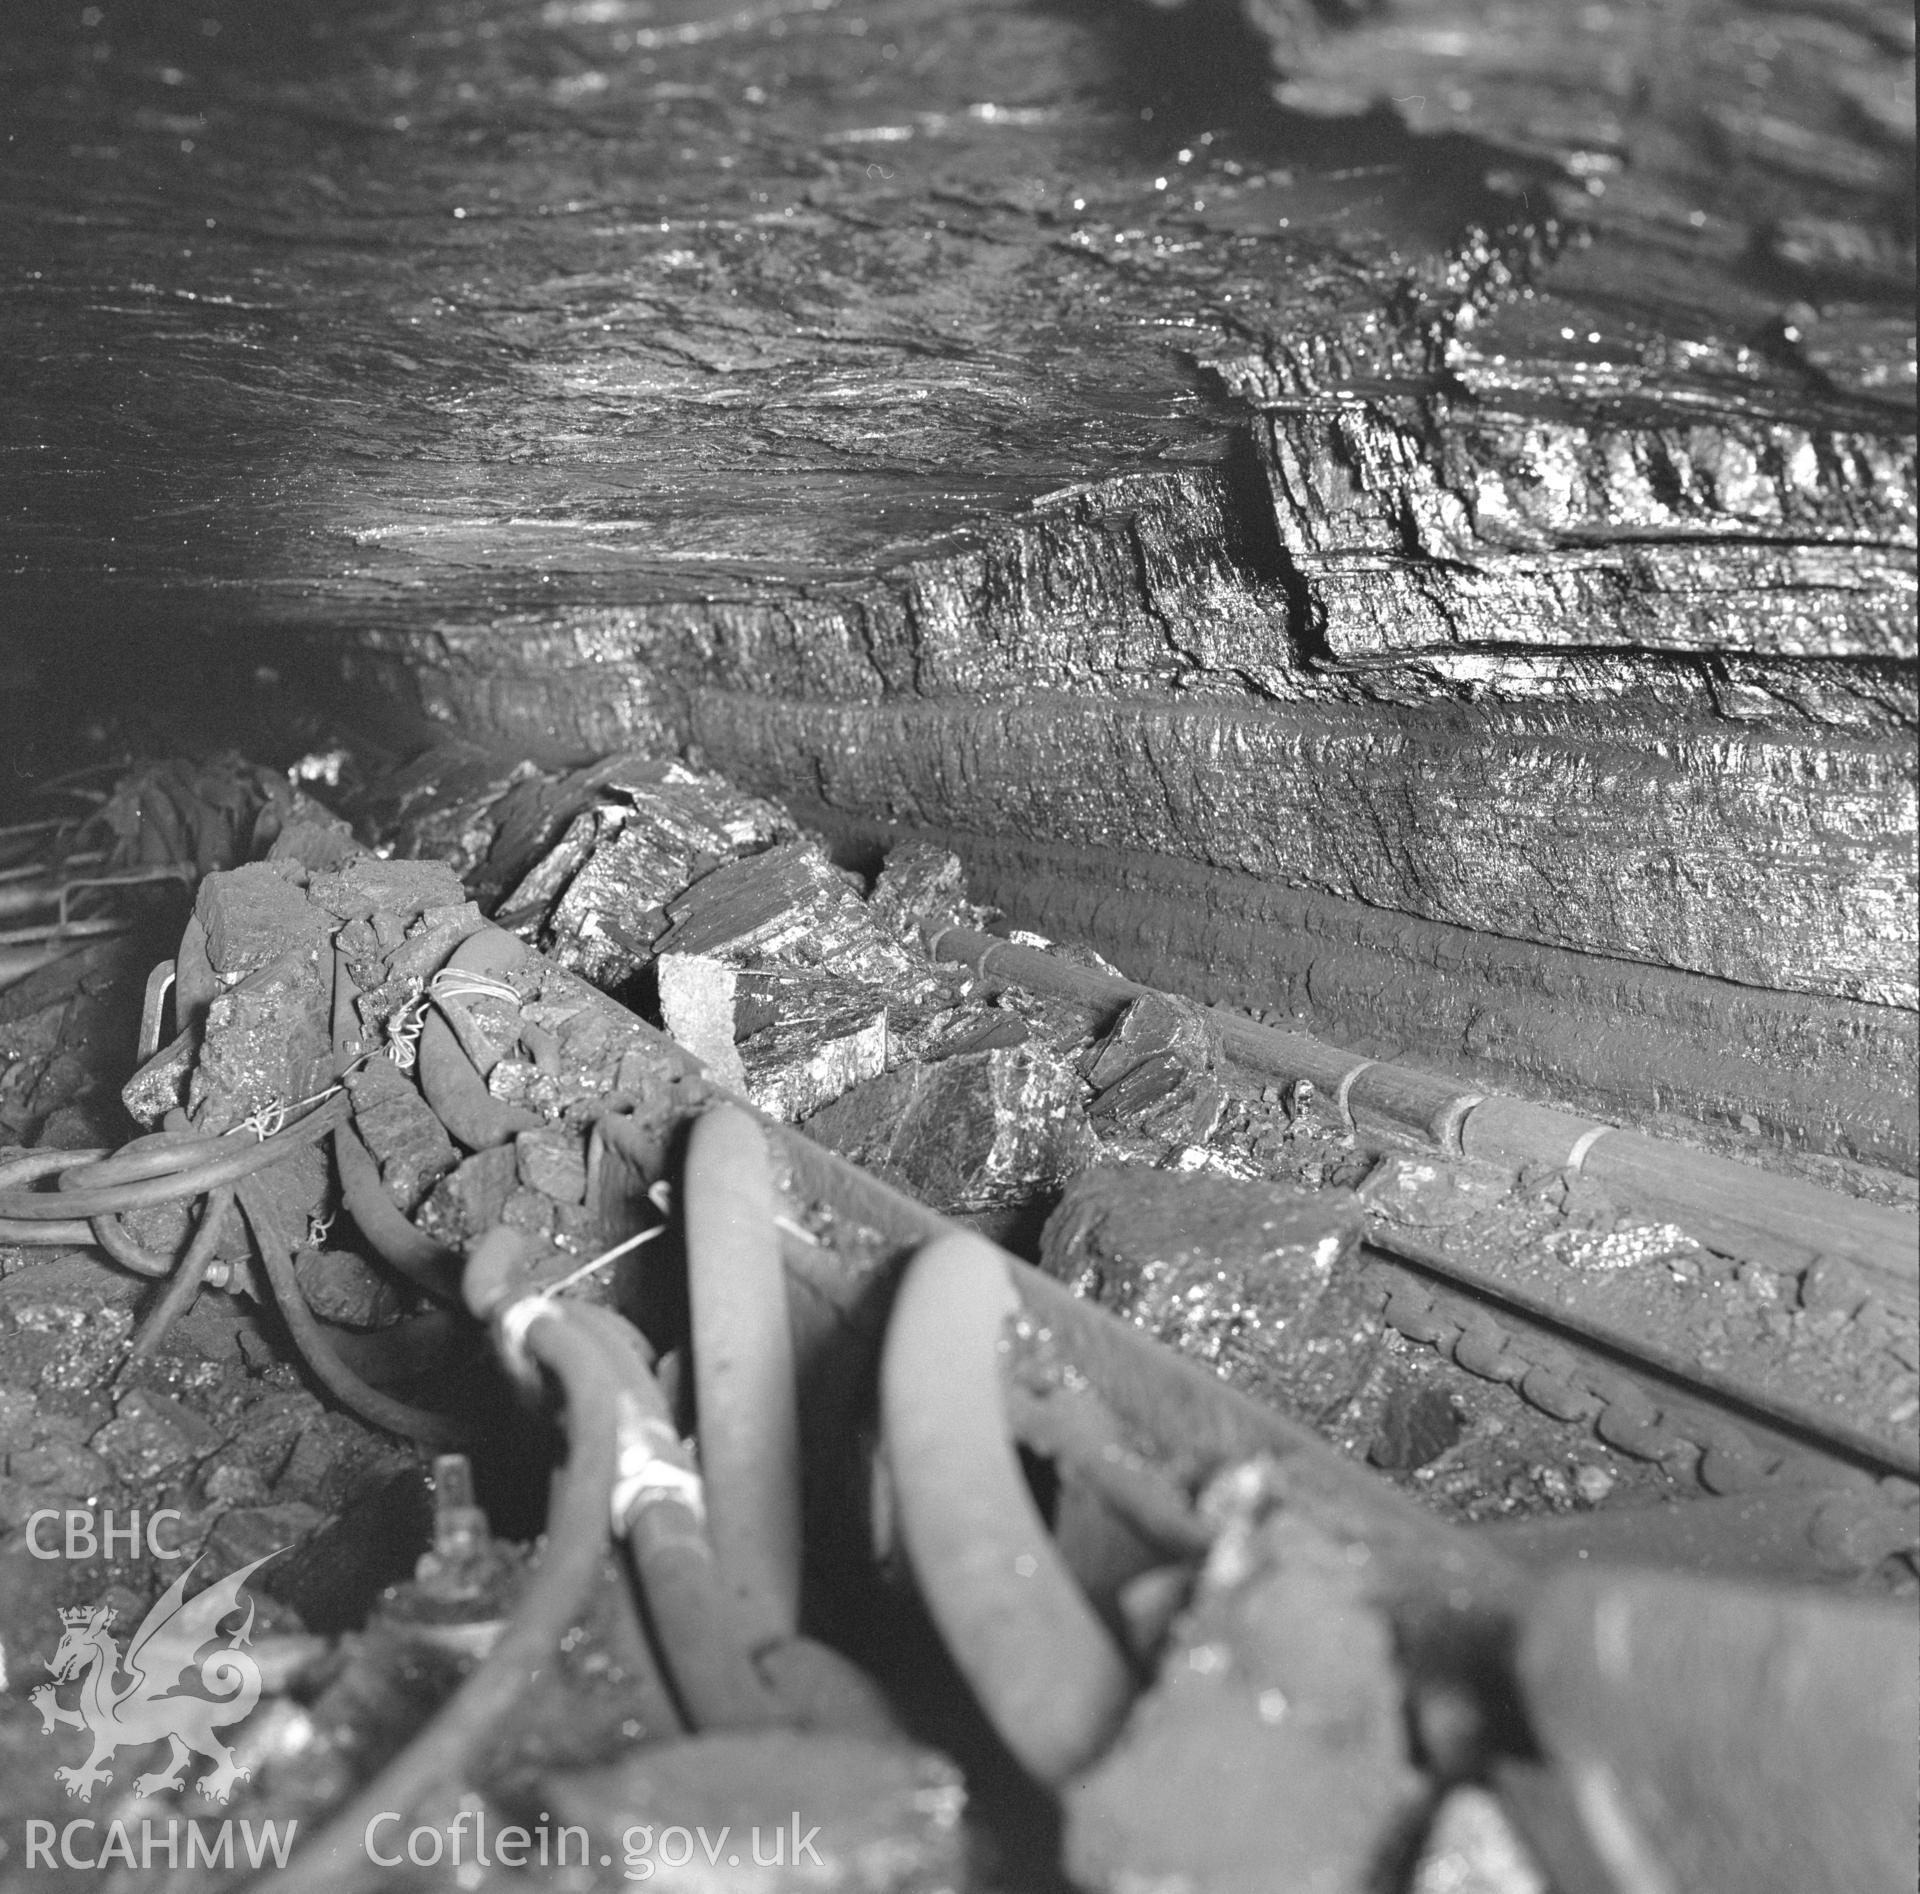 Digital copy of an acetate negative showing Big Pit - New Mine, G11 face, from the John Cornwell Collection.